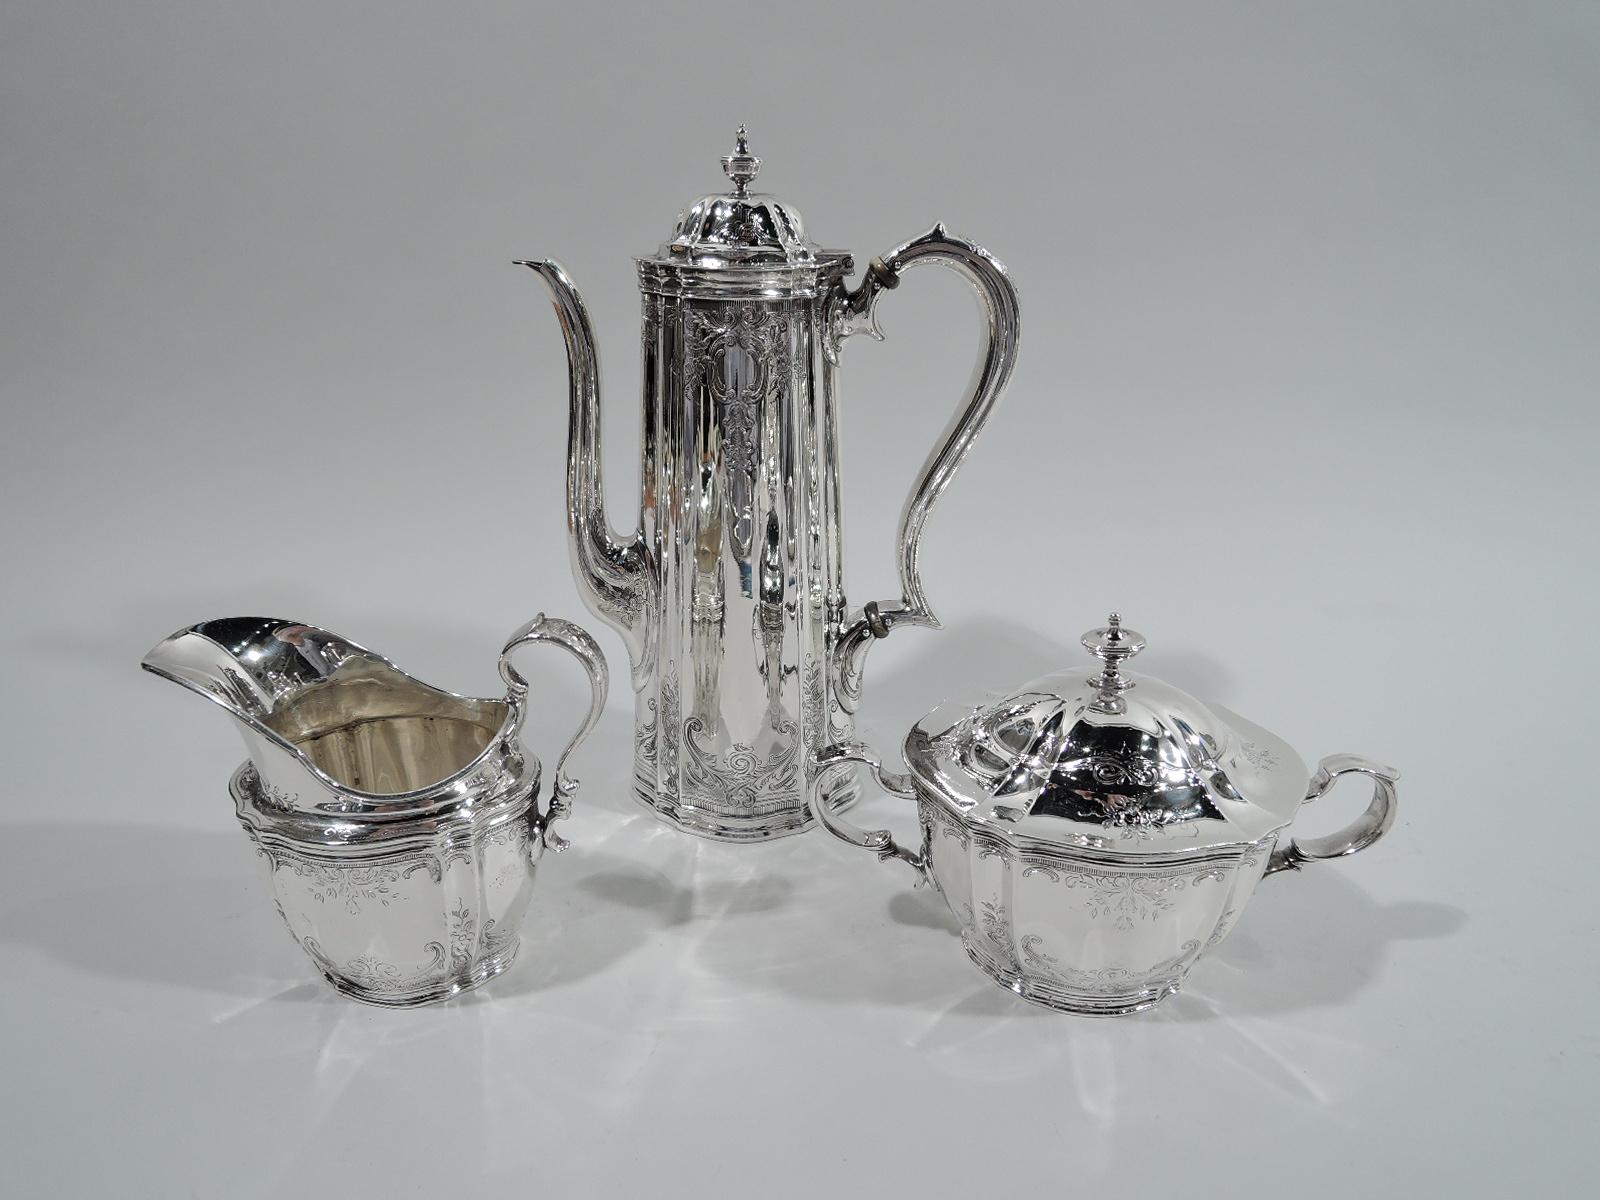 Victorian sterling silver 3-piece coffee set. Made by Tiffany & Co. in New York. This set comprises coffeepot, creamer, and sugar. Ovoid and fluted bodies. Capped double-scroll handles. Domed covers with vasiform finials. Engraved ornament: Leafing